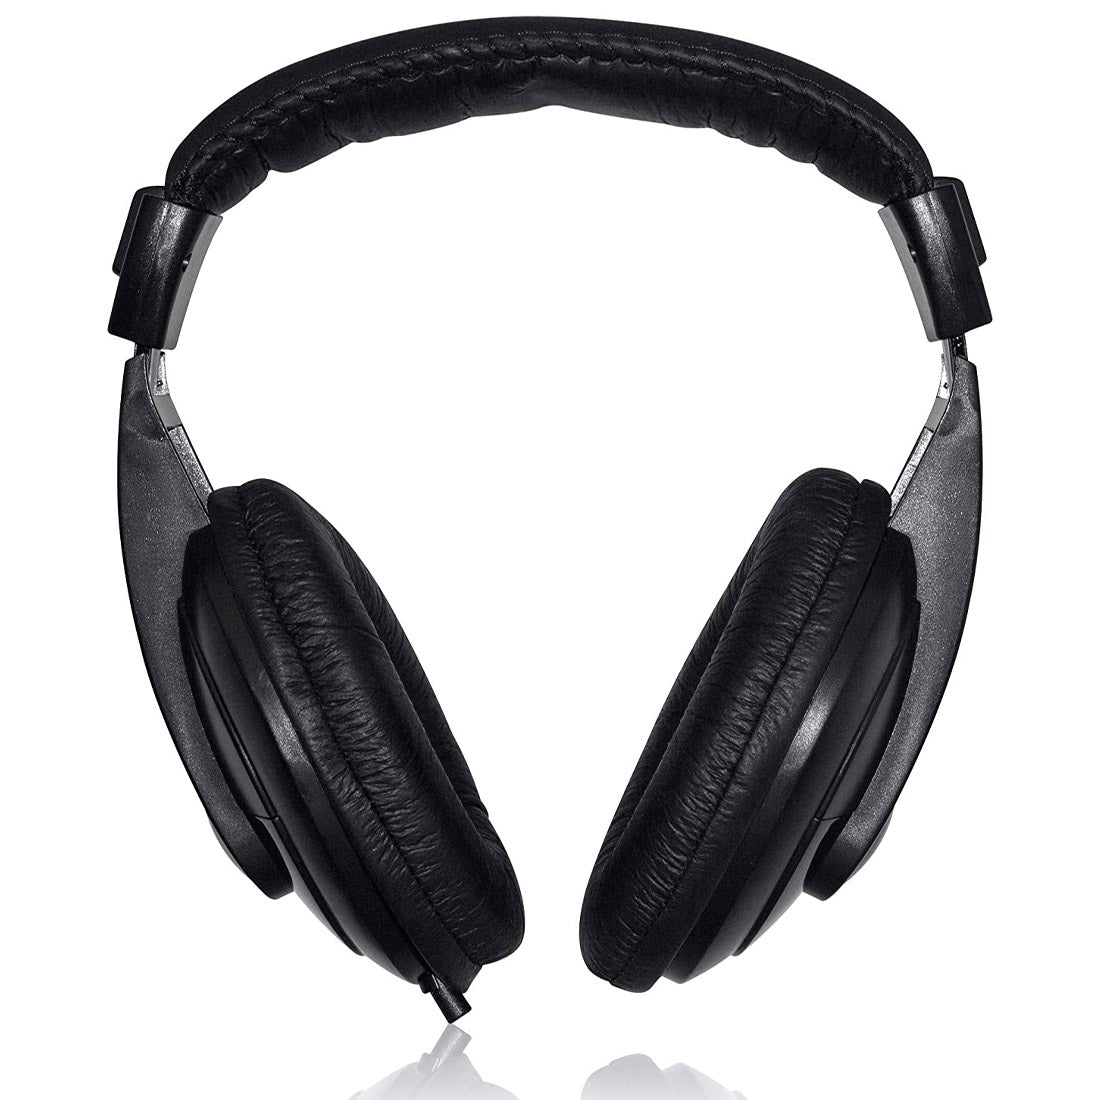 [RePacked] Behringer HPM1000 Over-Ear Wired Headset with 40mm Drivers - Black